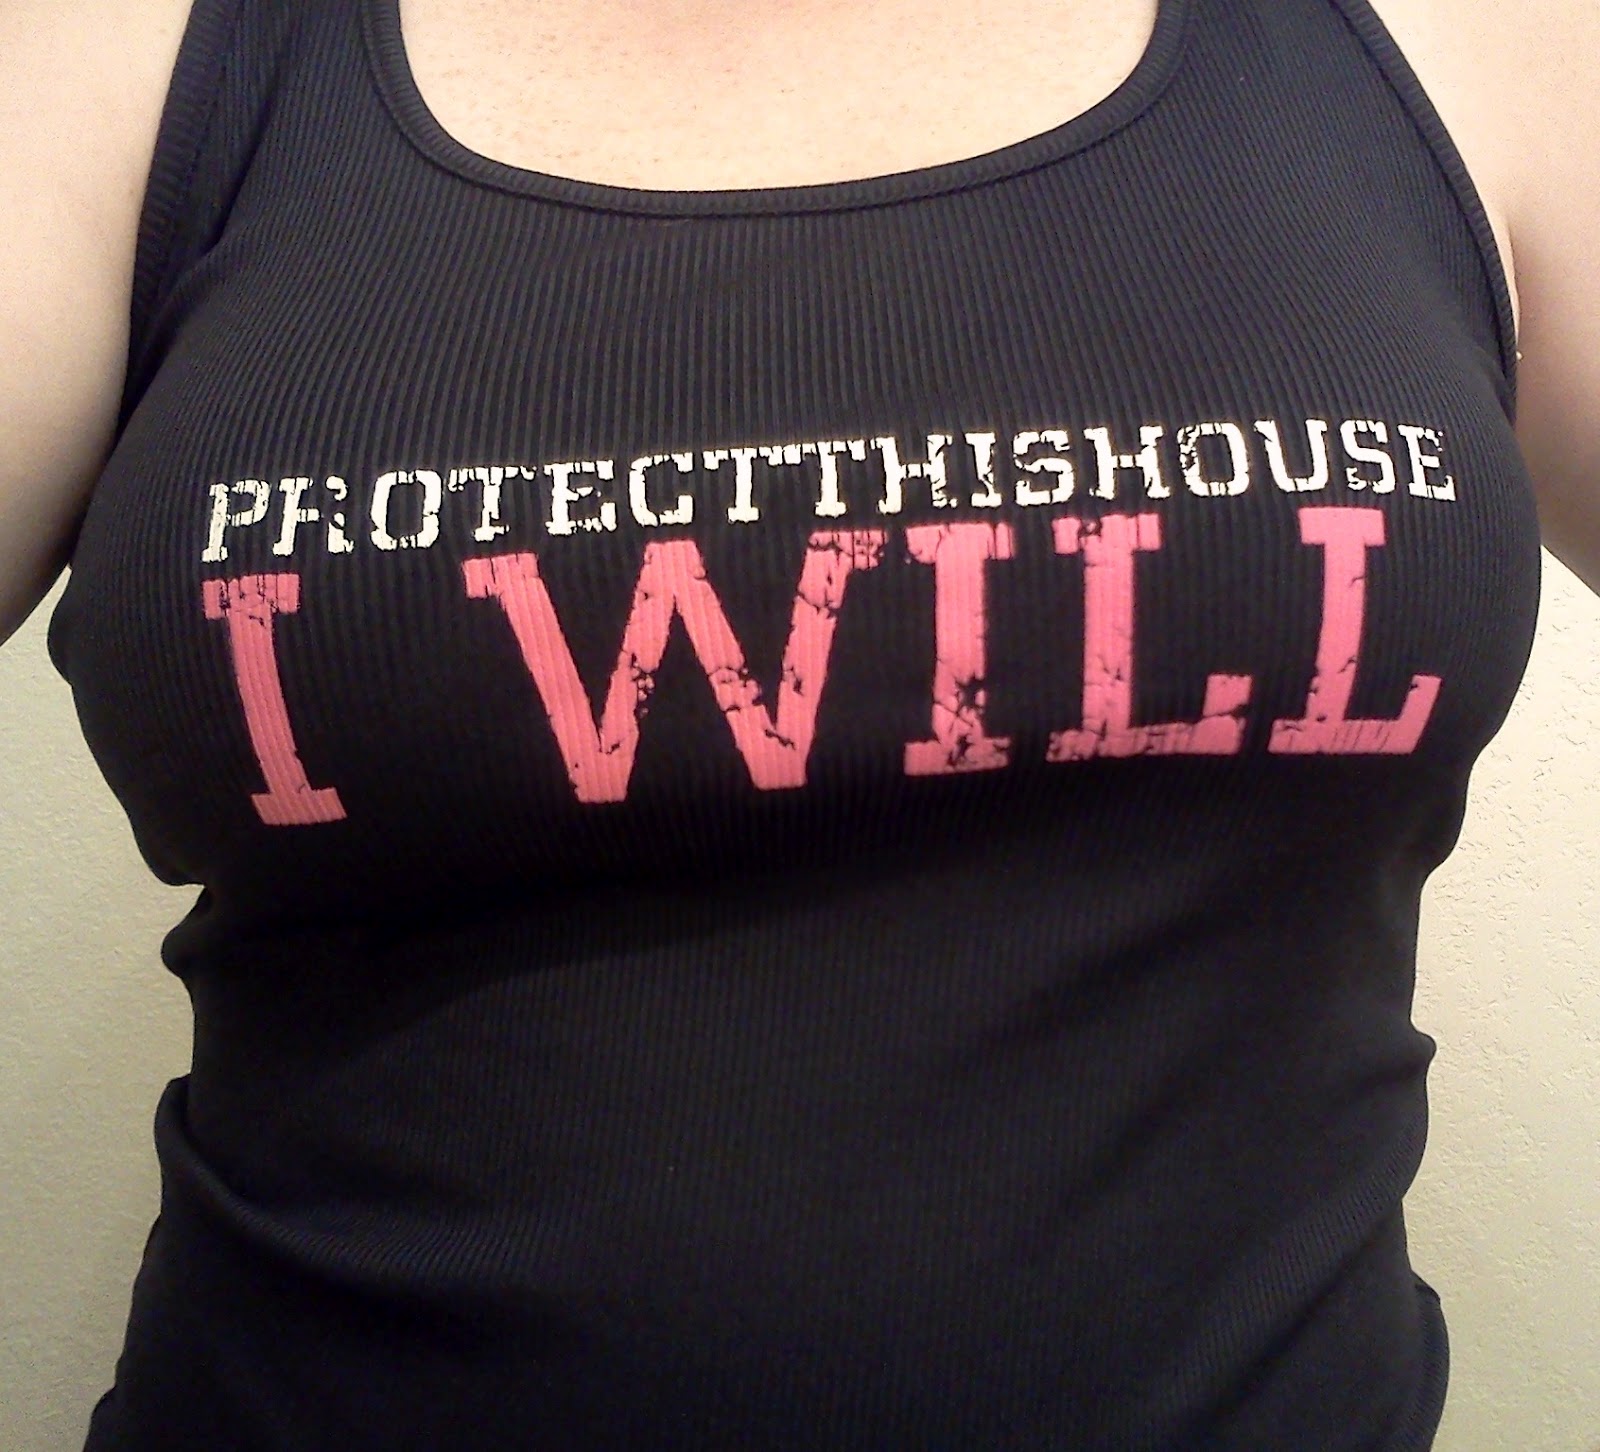 Under Armour: protect this house! I will